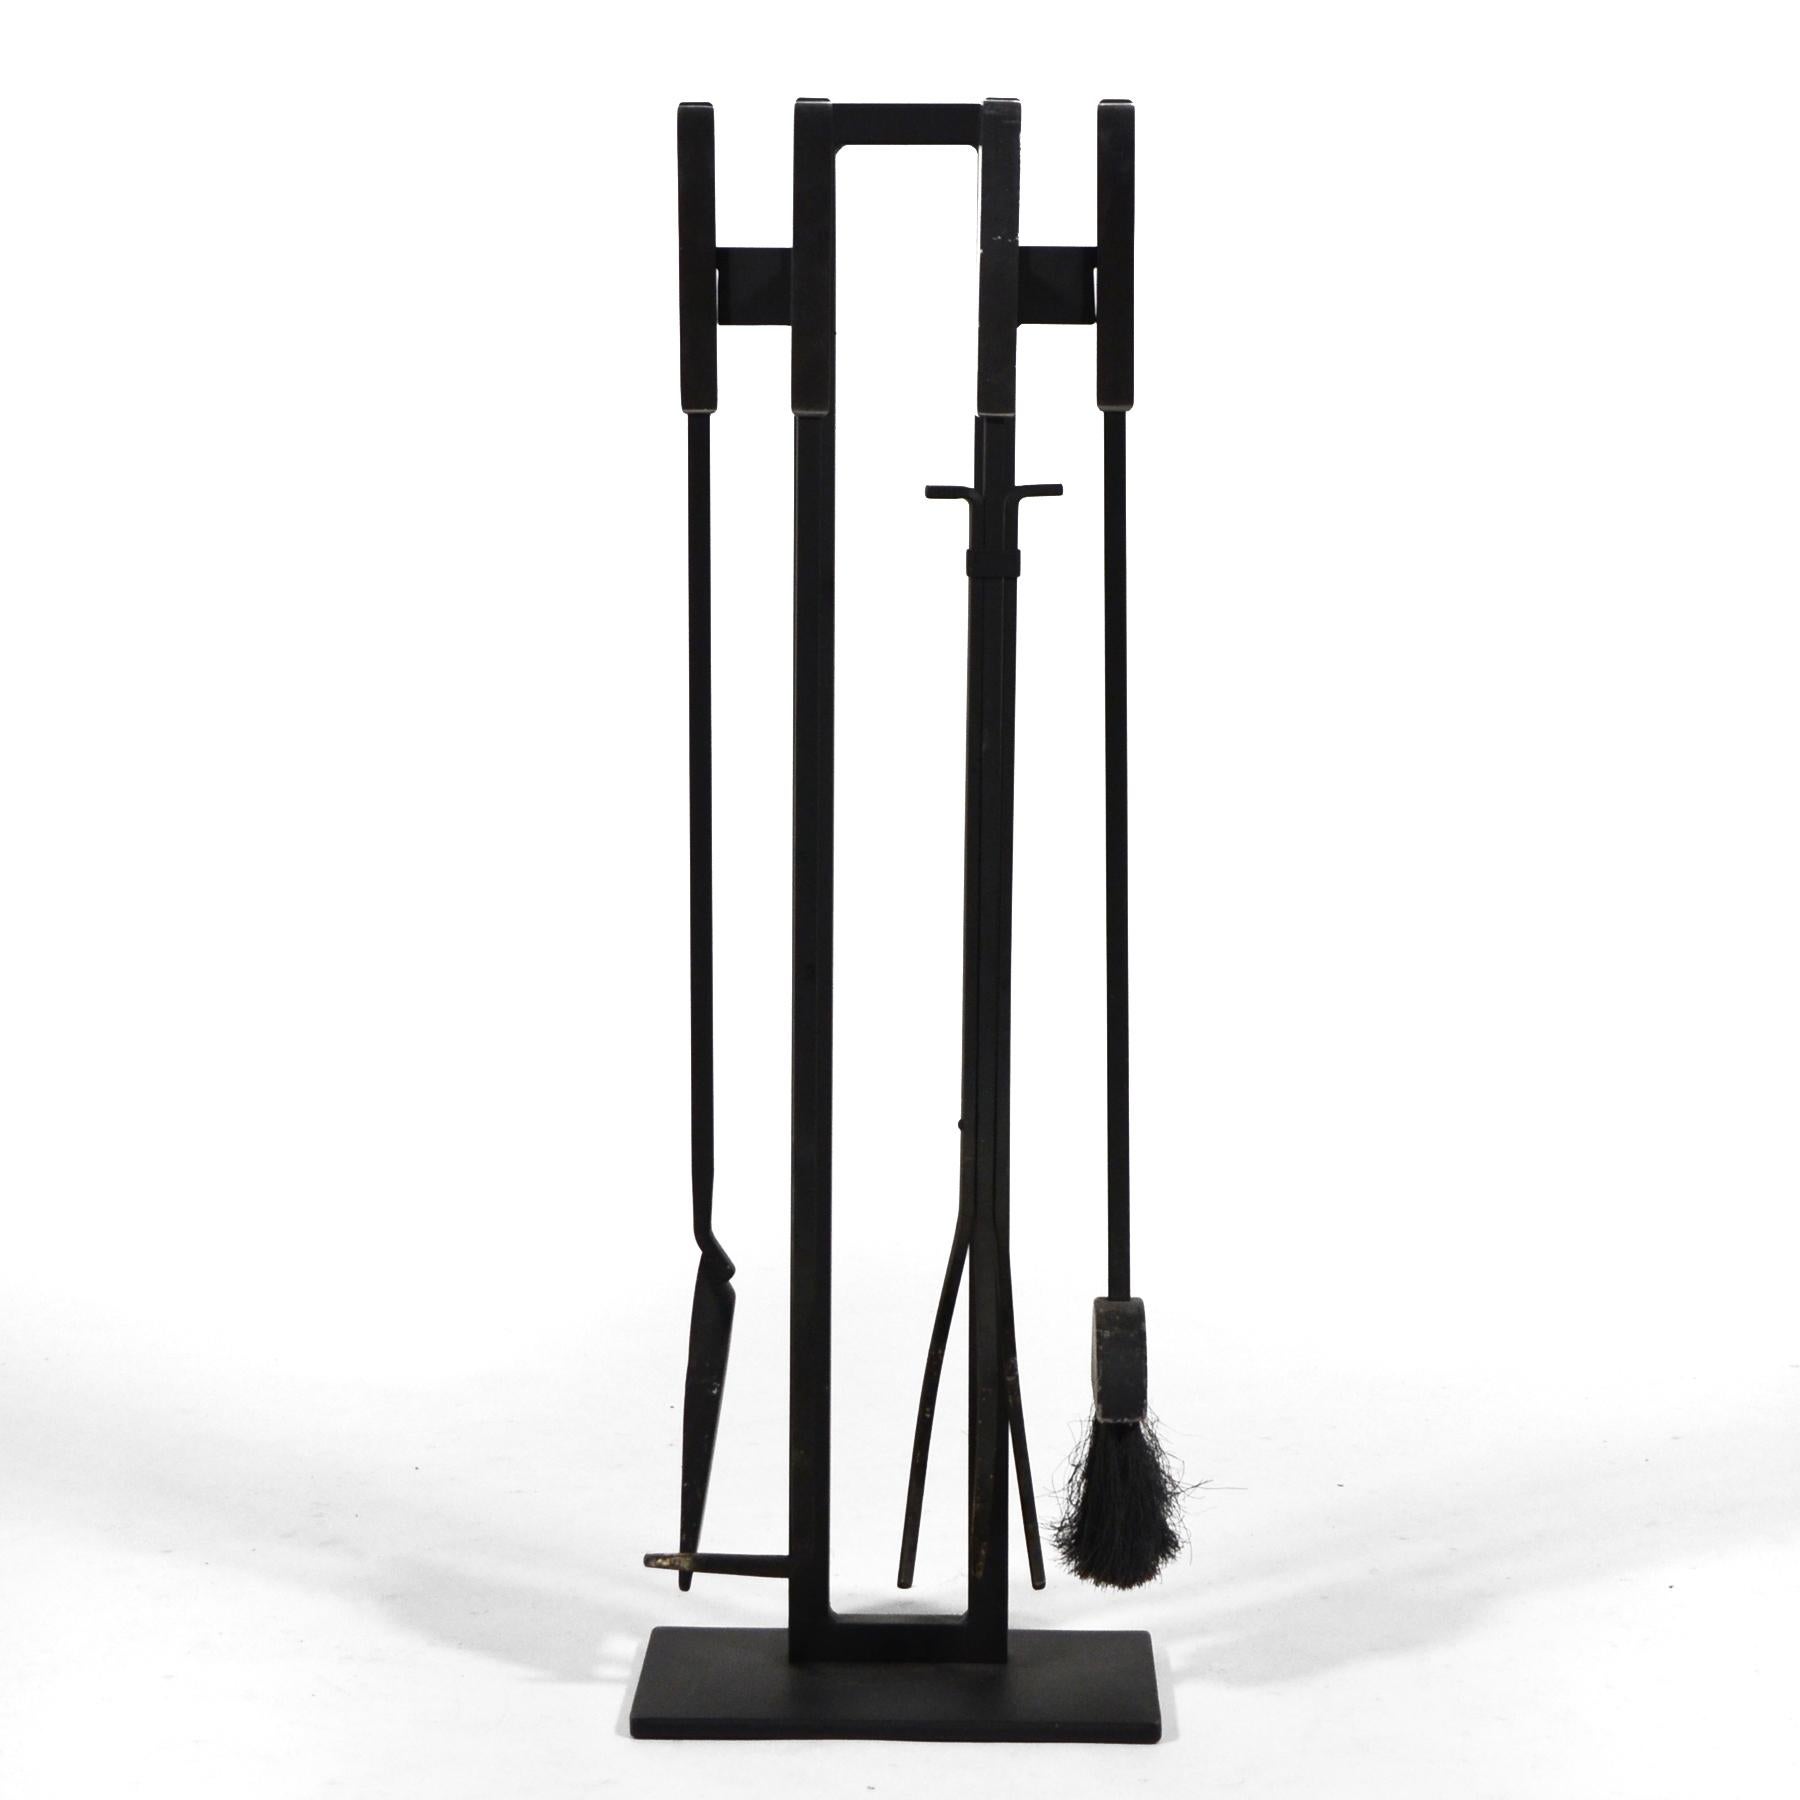 A wonderful architectural design by Pilgrim, this five piece set of iron fire tools features a poker, shovel, broom, and tongs, all with brushed steel handles and all of which are held by a stand.

Measures: 31